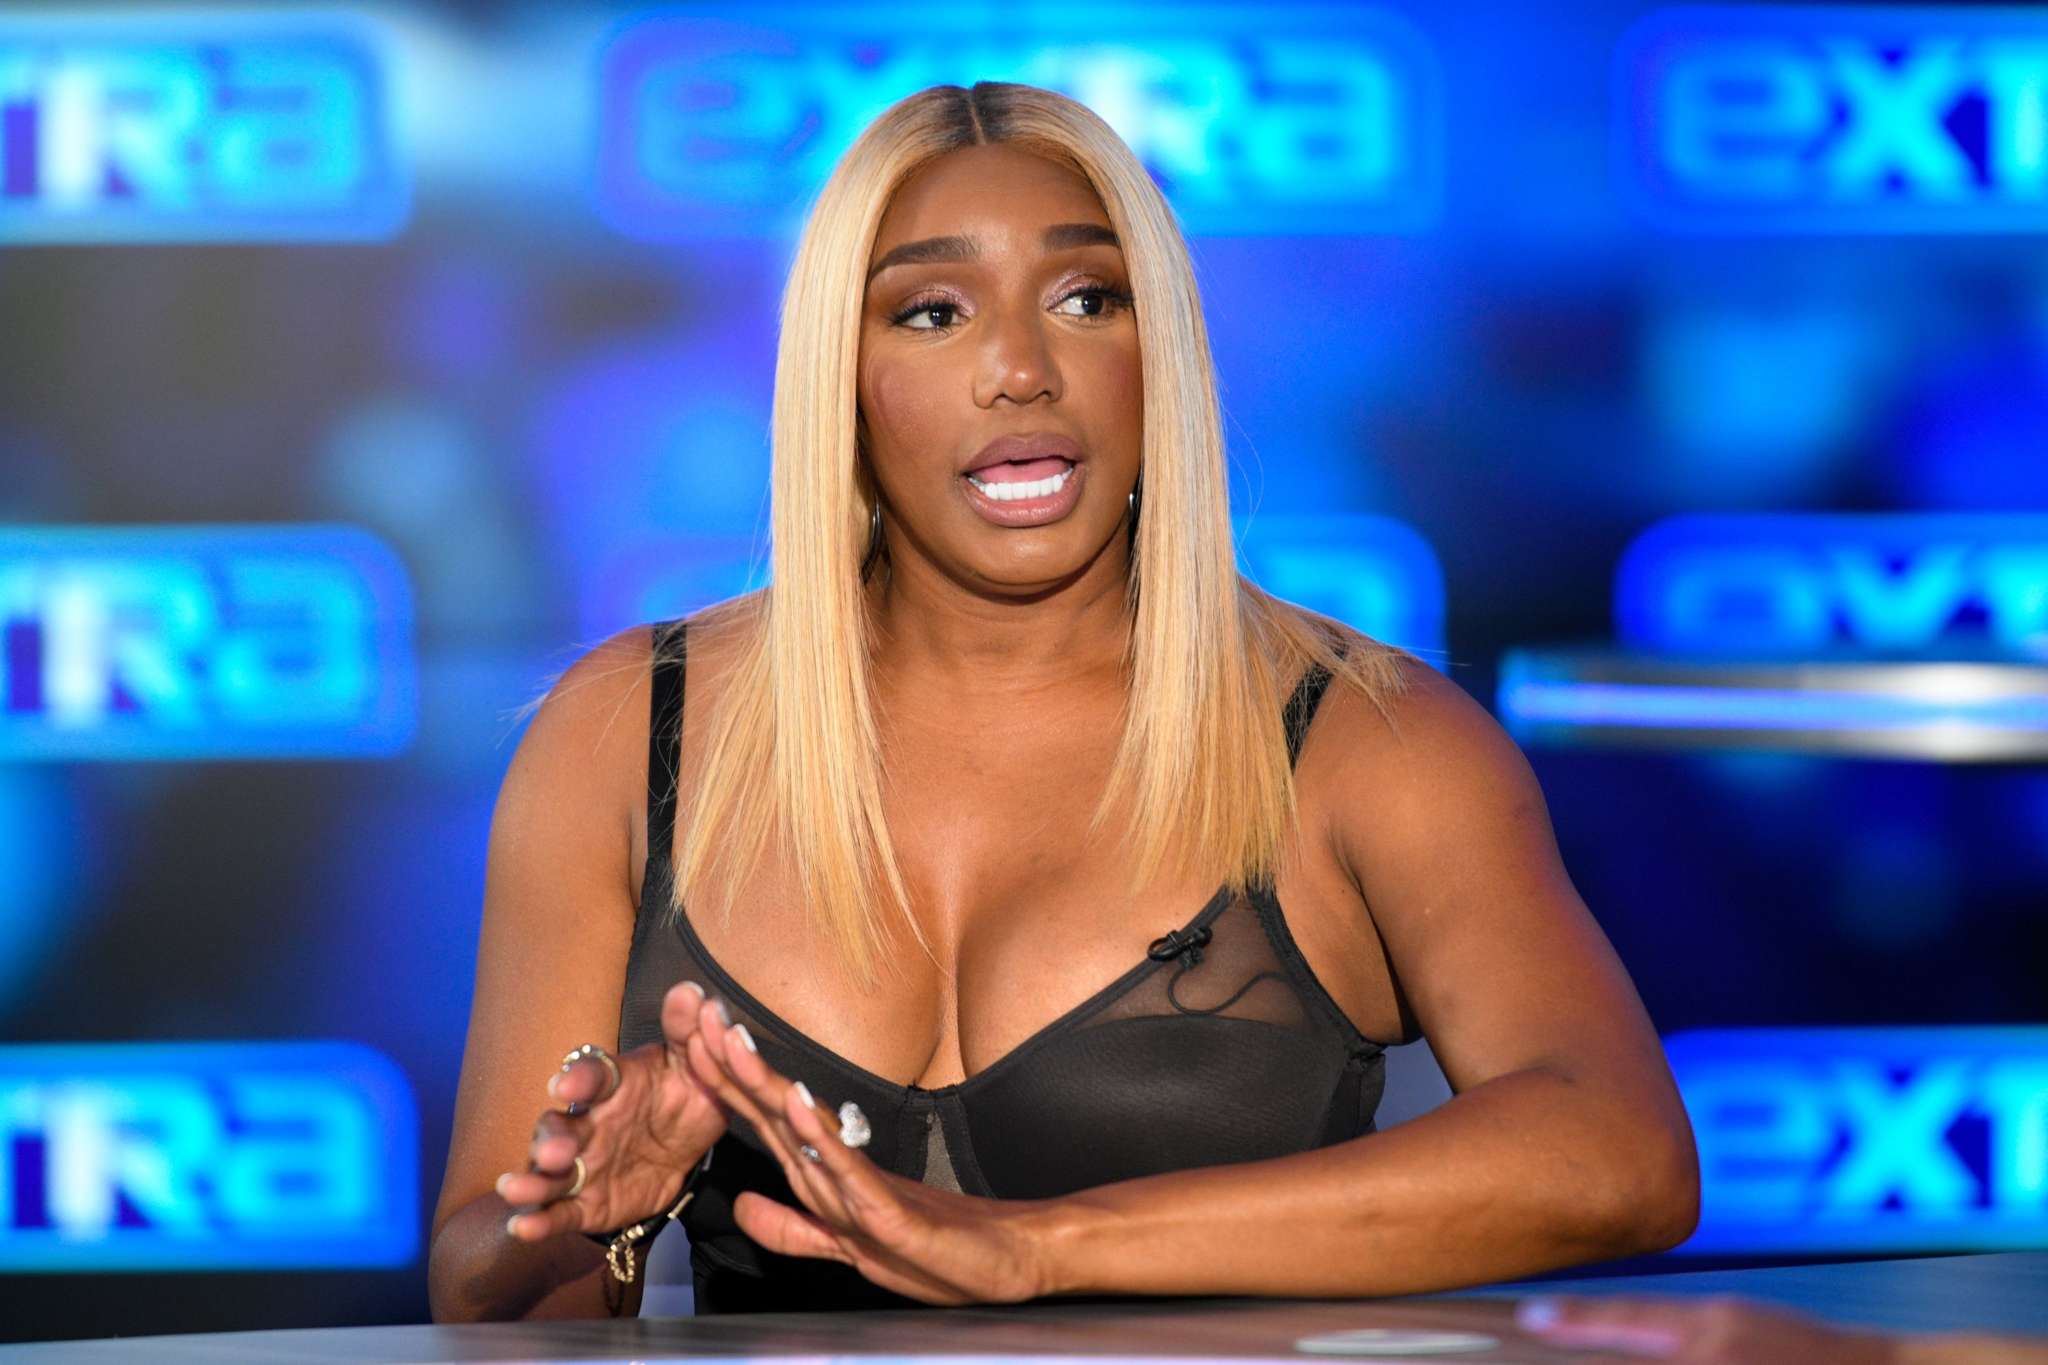 NeNe Leakes' Track 'Hunni' Is Available On All Streaming Platforms And Her Fans Say They Will Buy It With Their Trump Check!